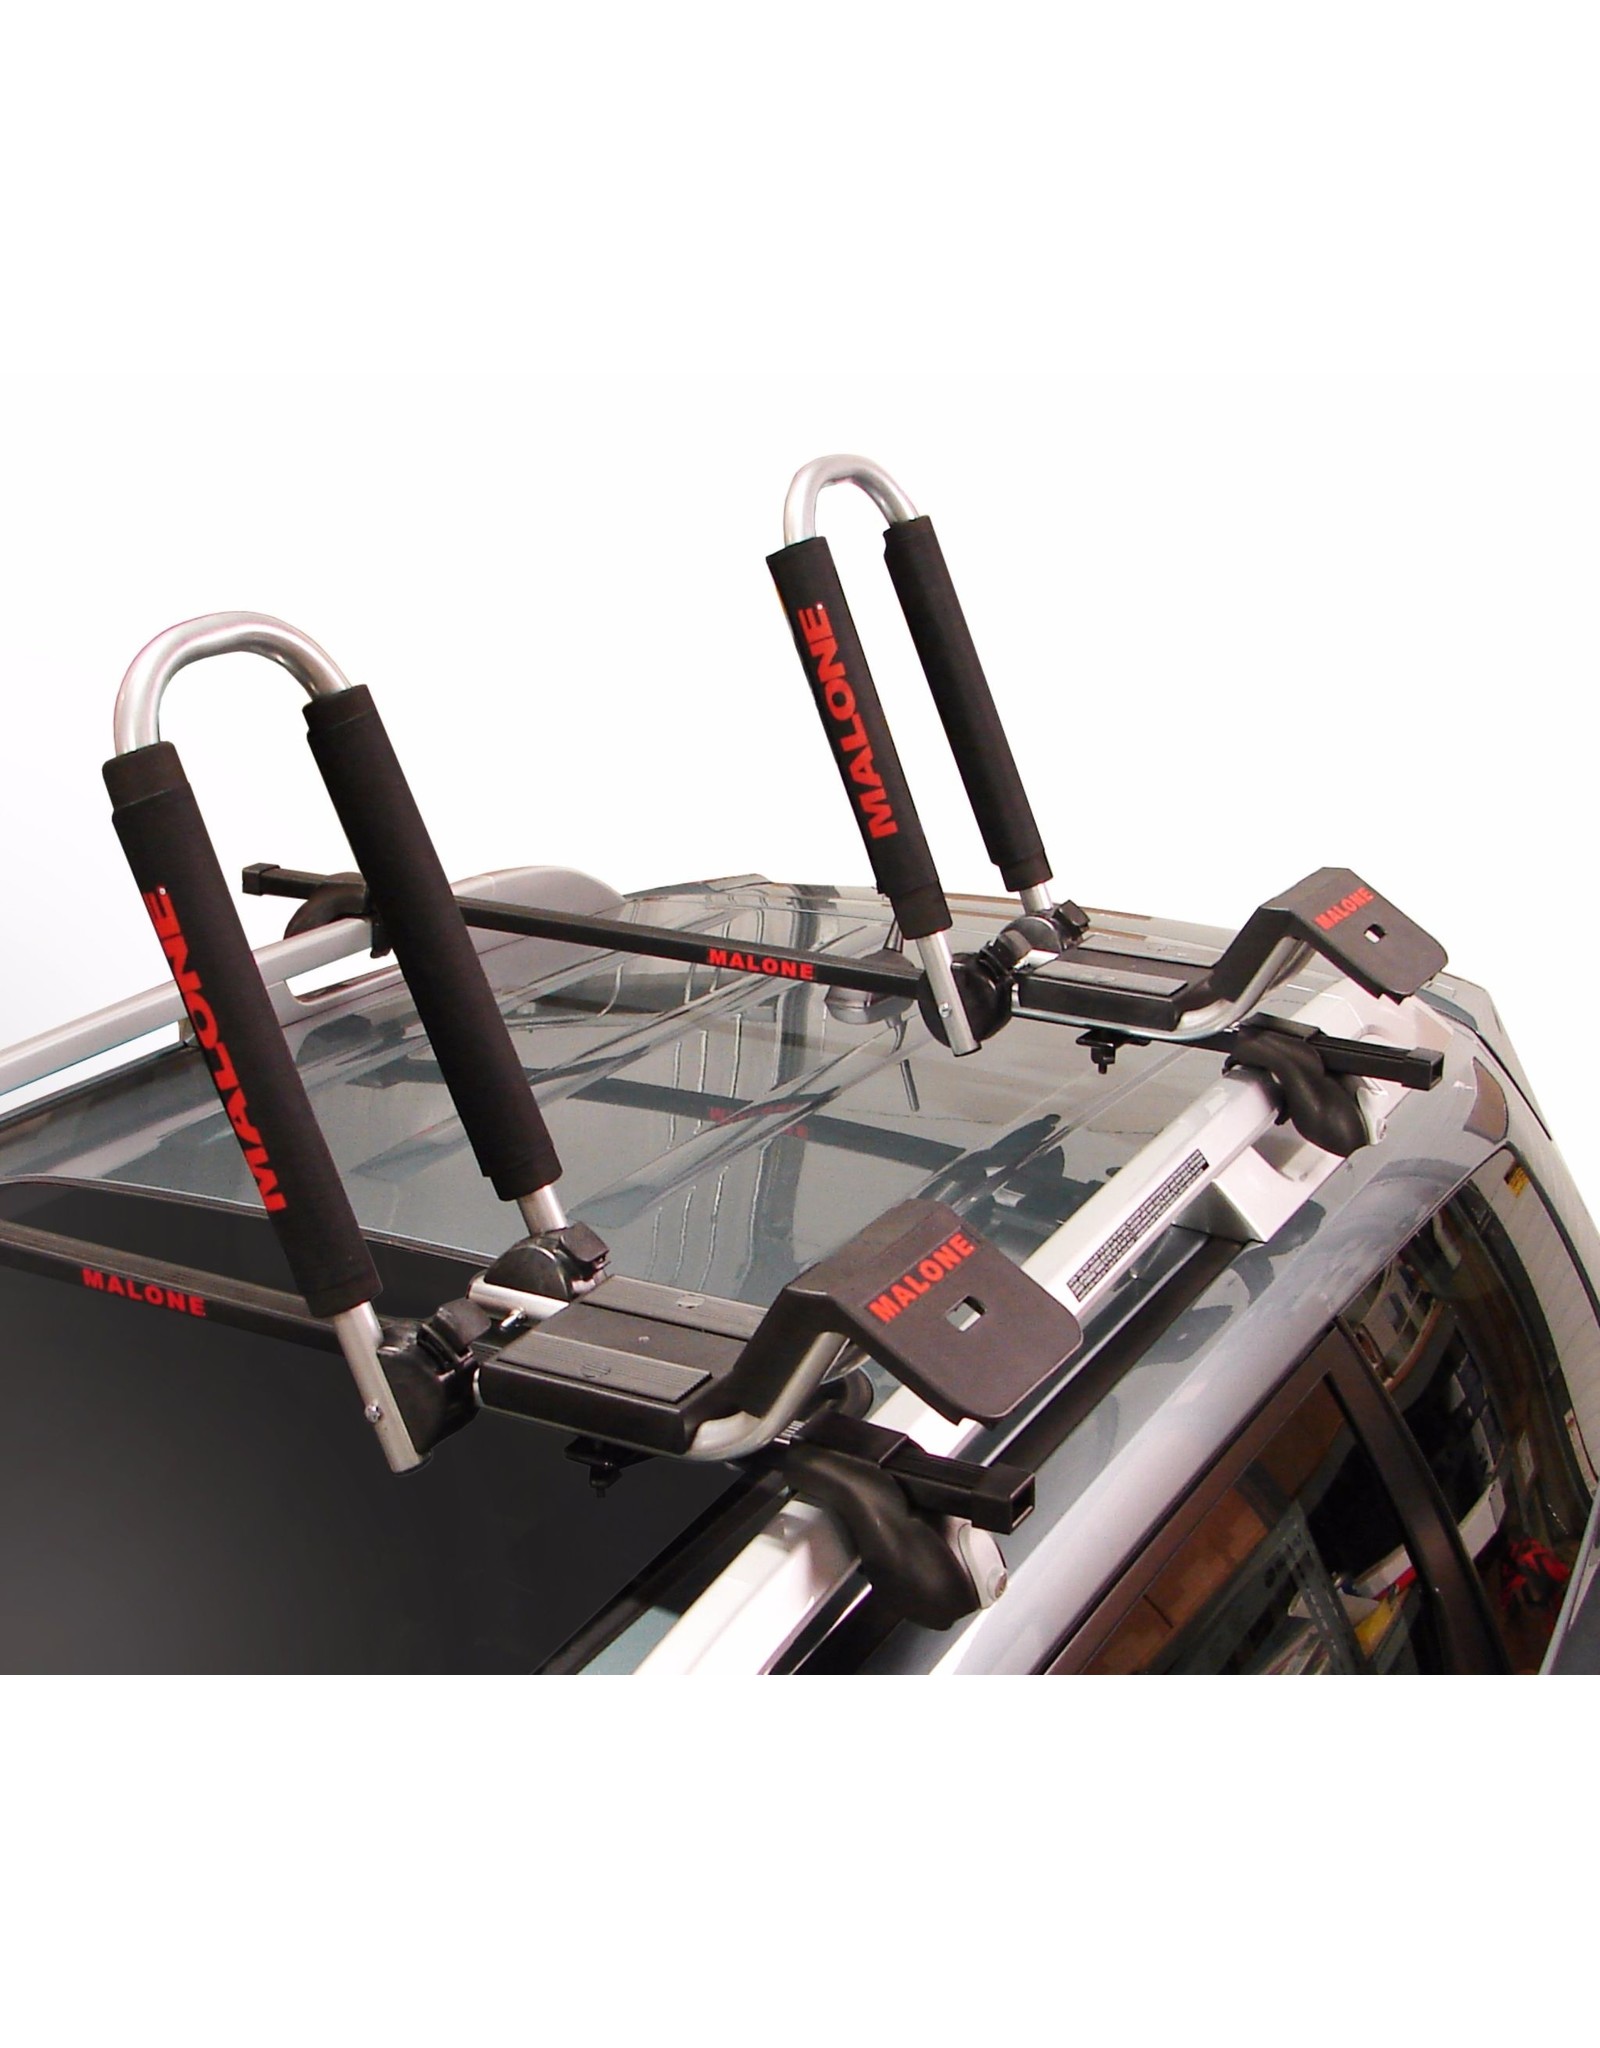 Malone Auto Rack Malone DownLoader Kayak Carrier with Tie-Downs